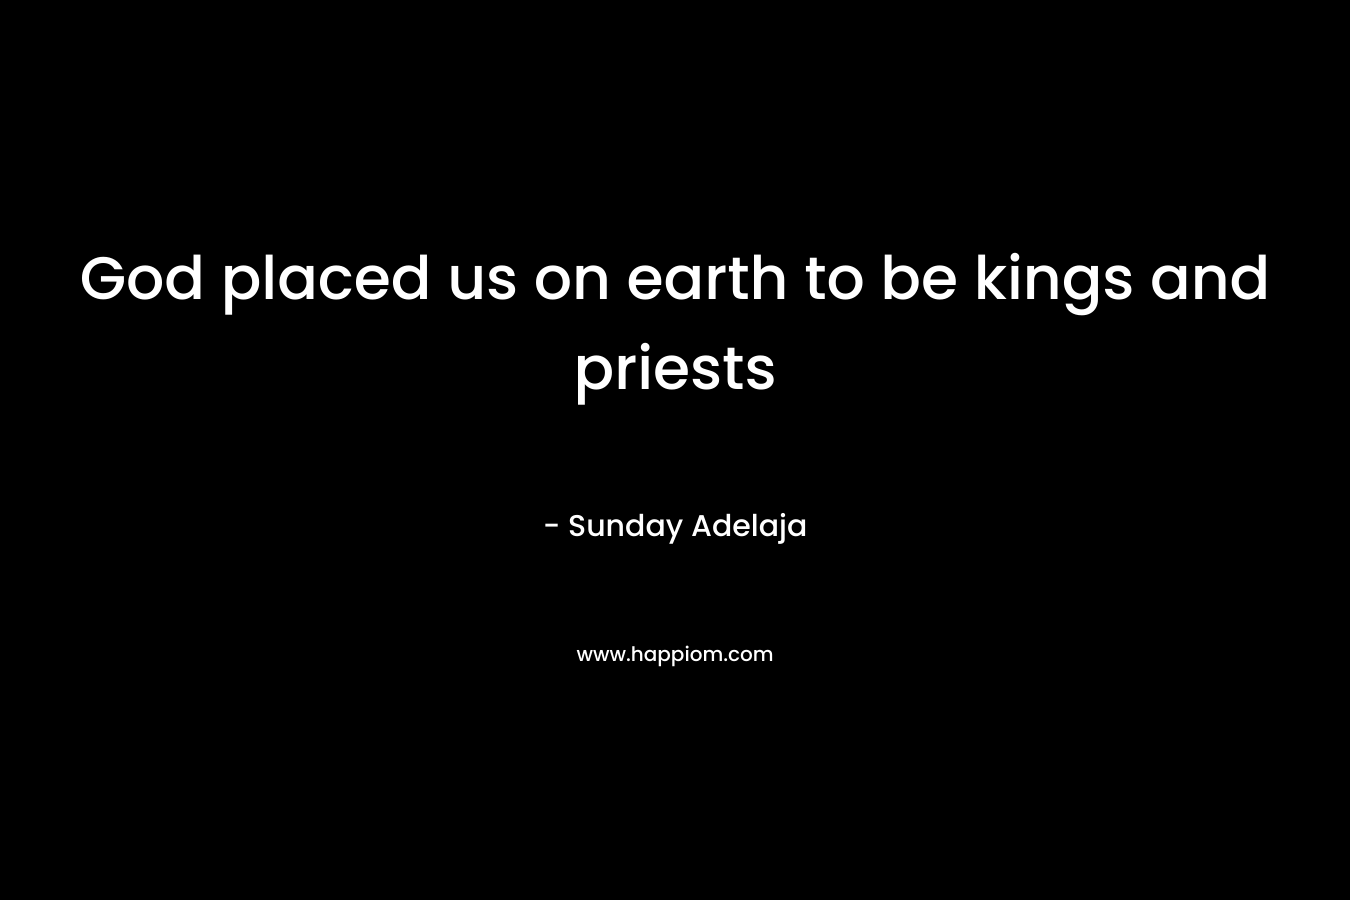 God placed us on earth to be kings and priests